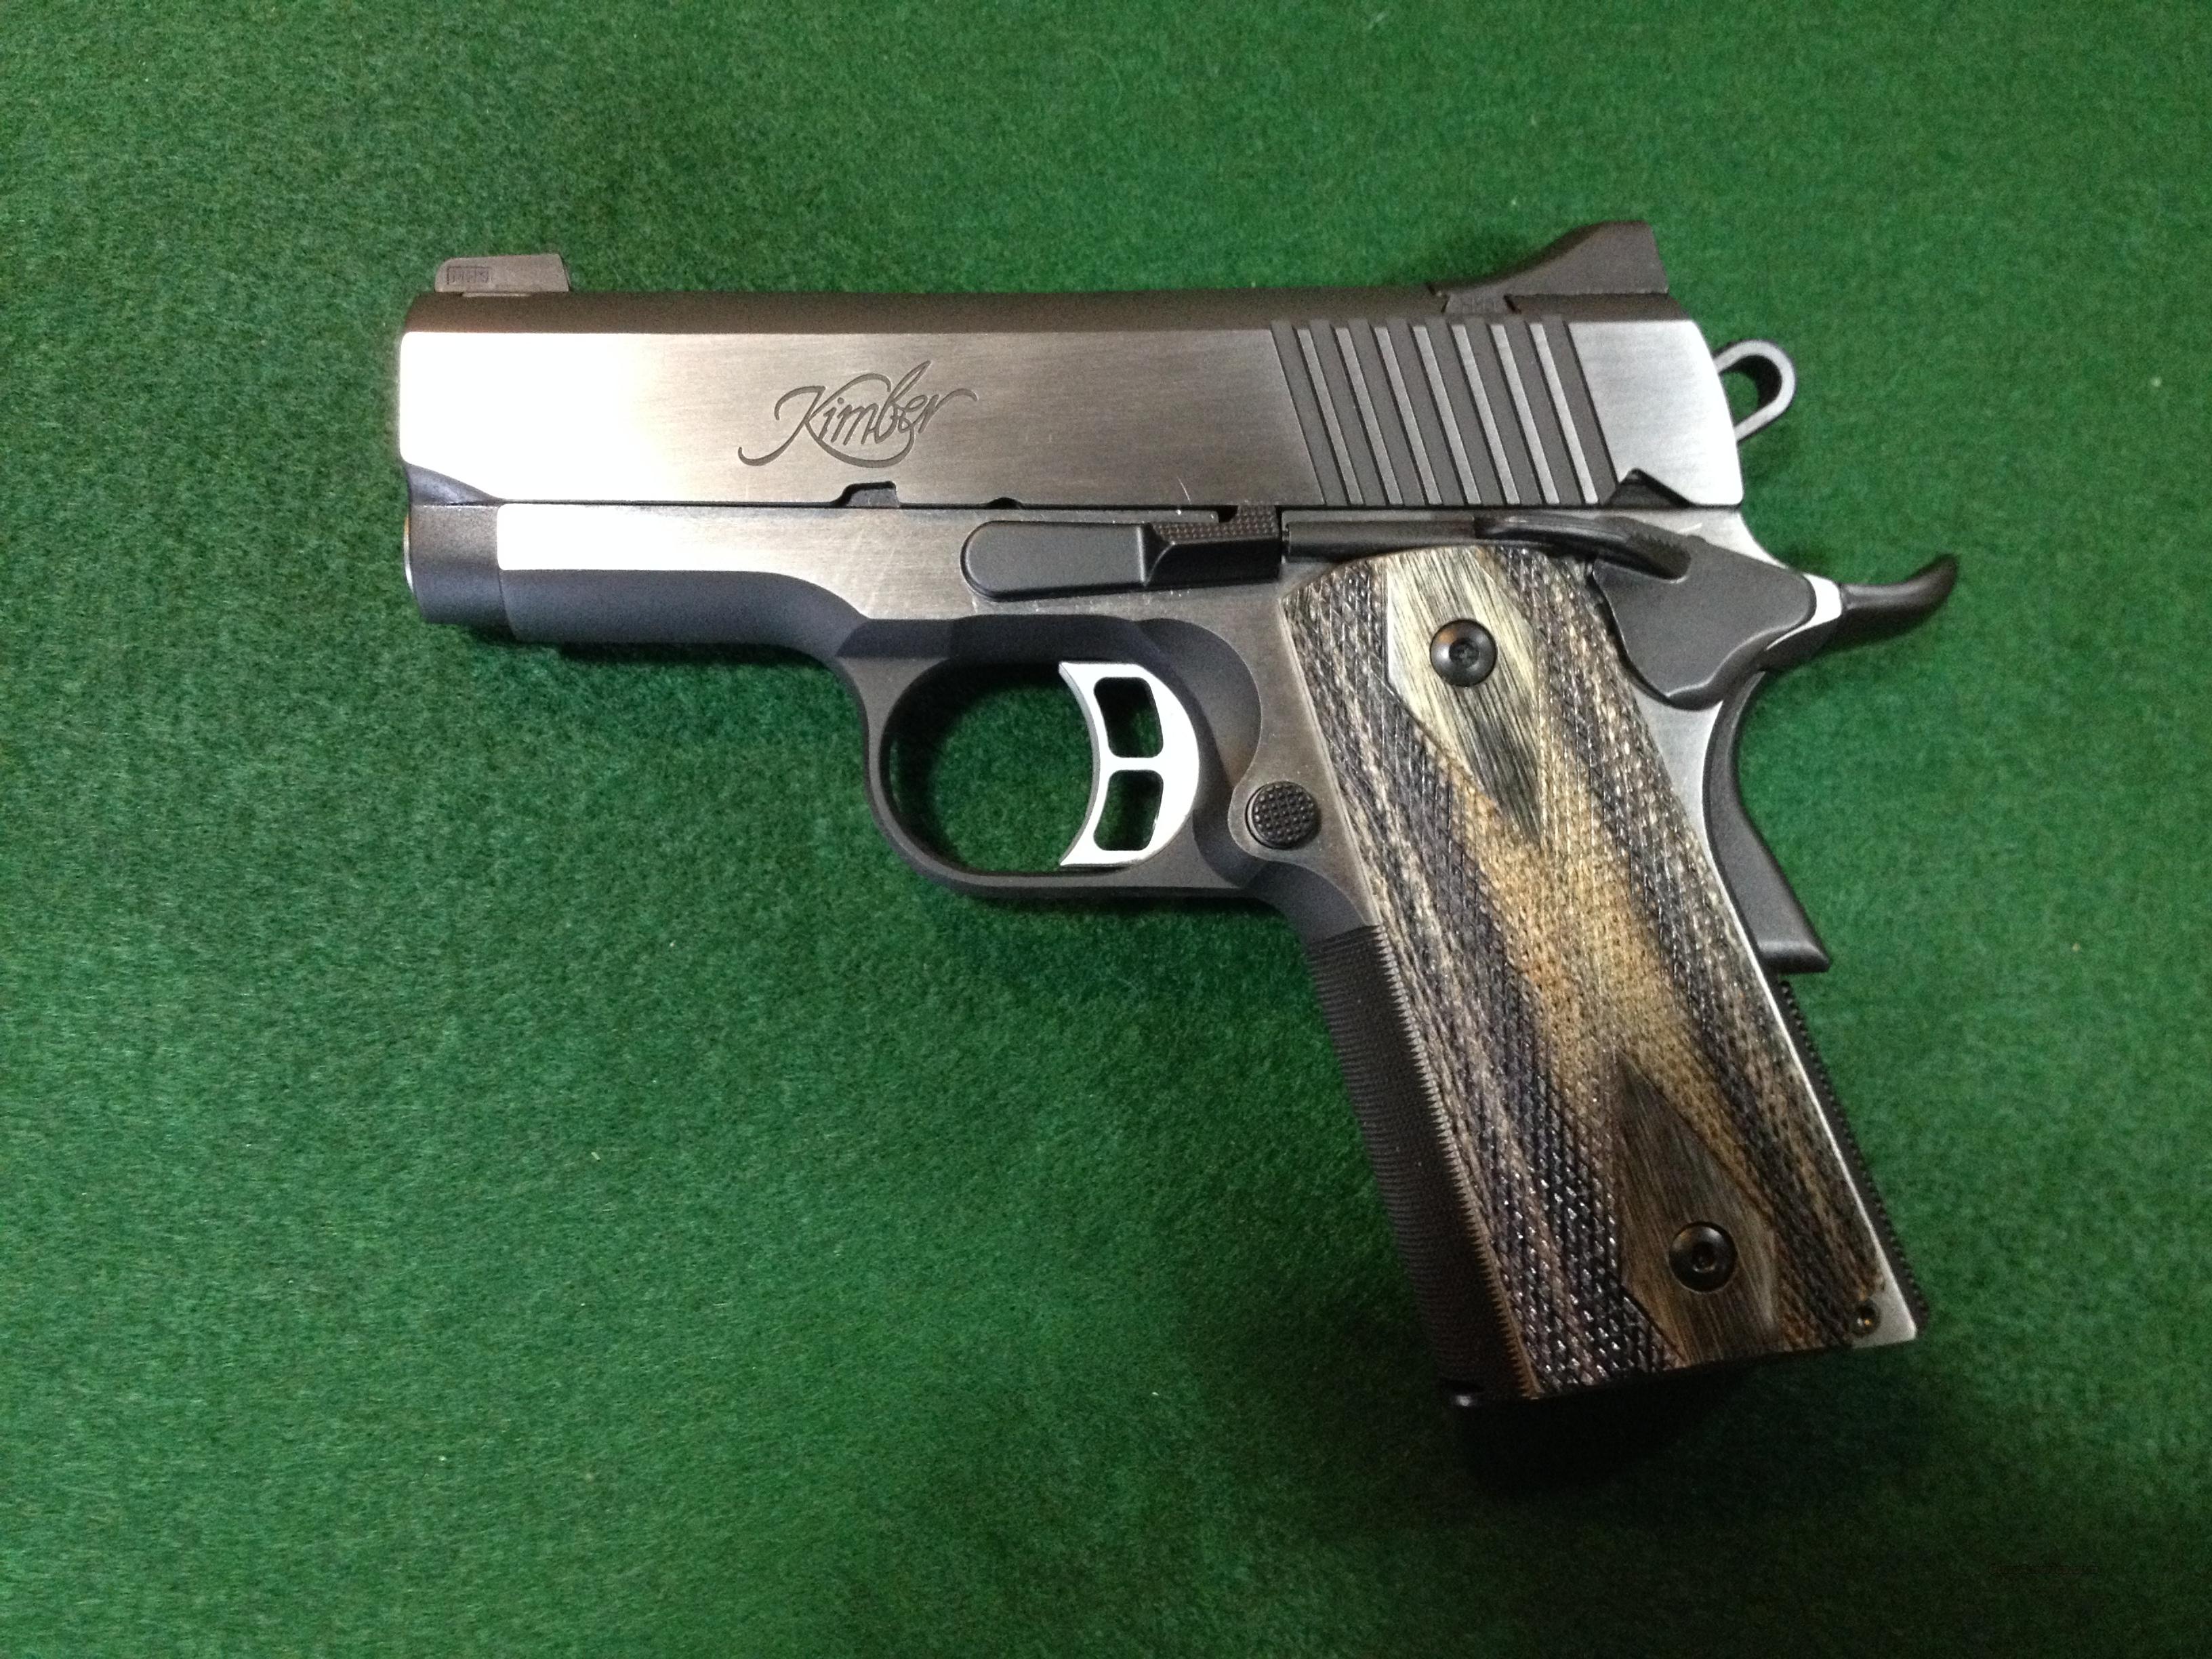 Kimber Eclipse Ultra II 45ACP for sale at 998257160